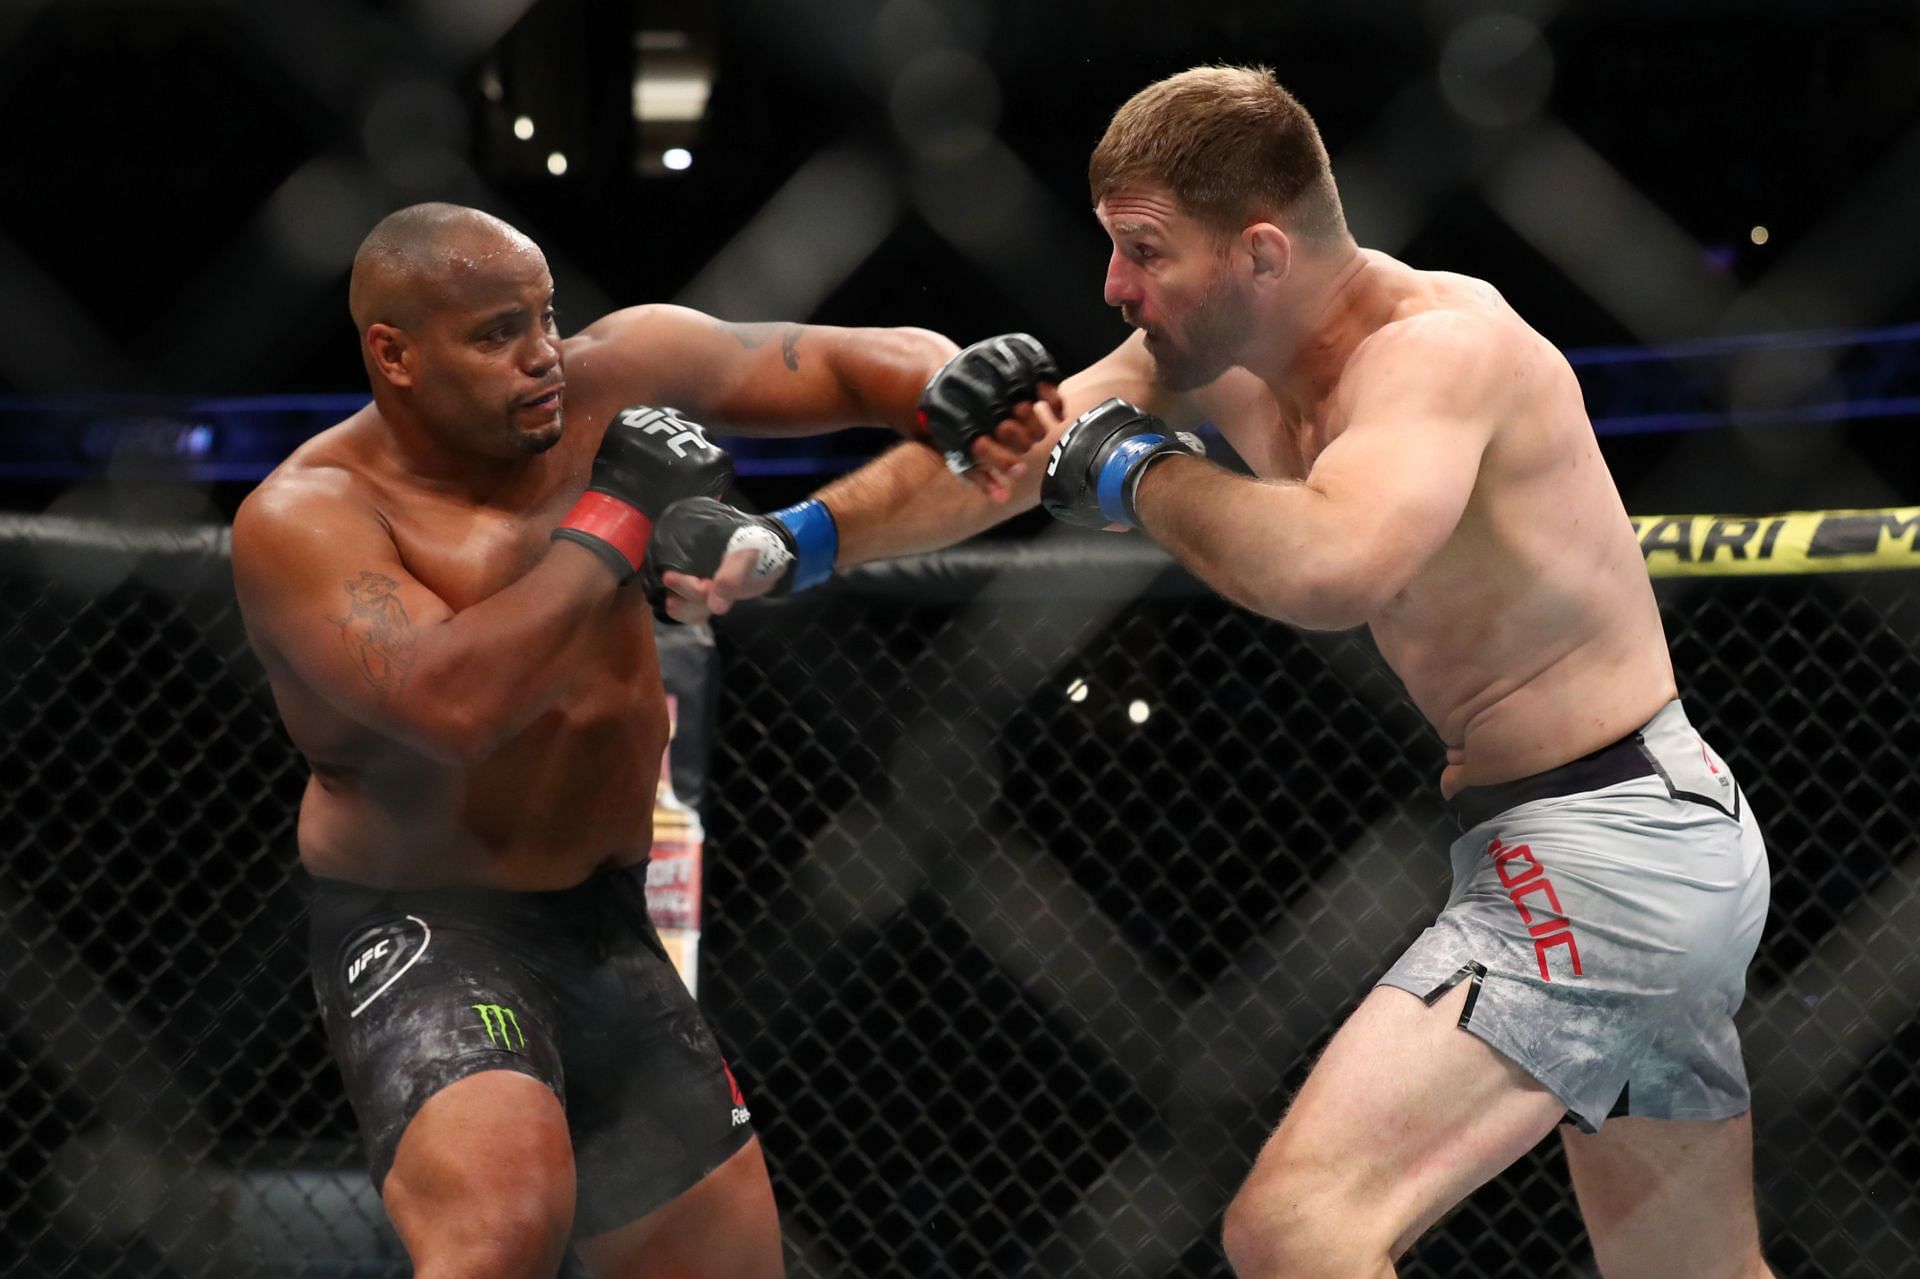 Stipe Miocic reclaimed his heavyweight title from Daniel Cormier in 2019